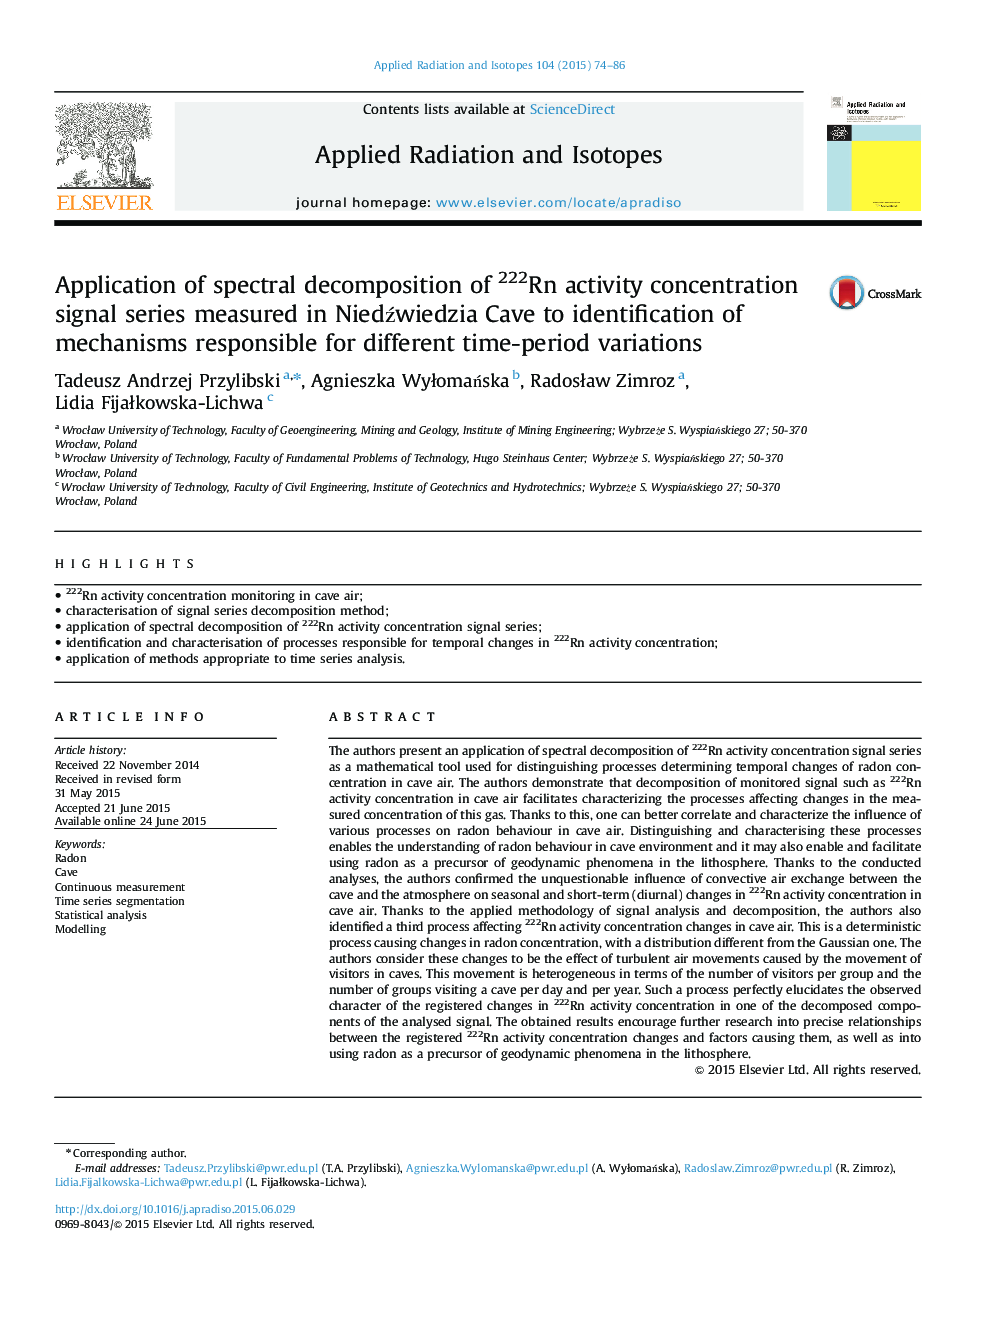 Application of spectral decomposition of 222Rn activity concentration signal series measured in NiedÅºwiedzia Cave to identification of mechanisms responsible for different time-period variations